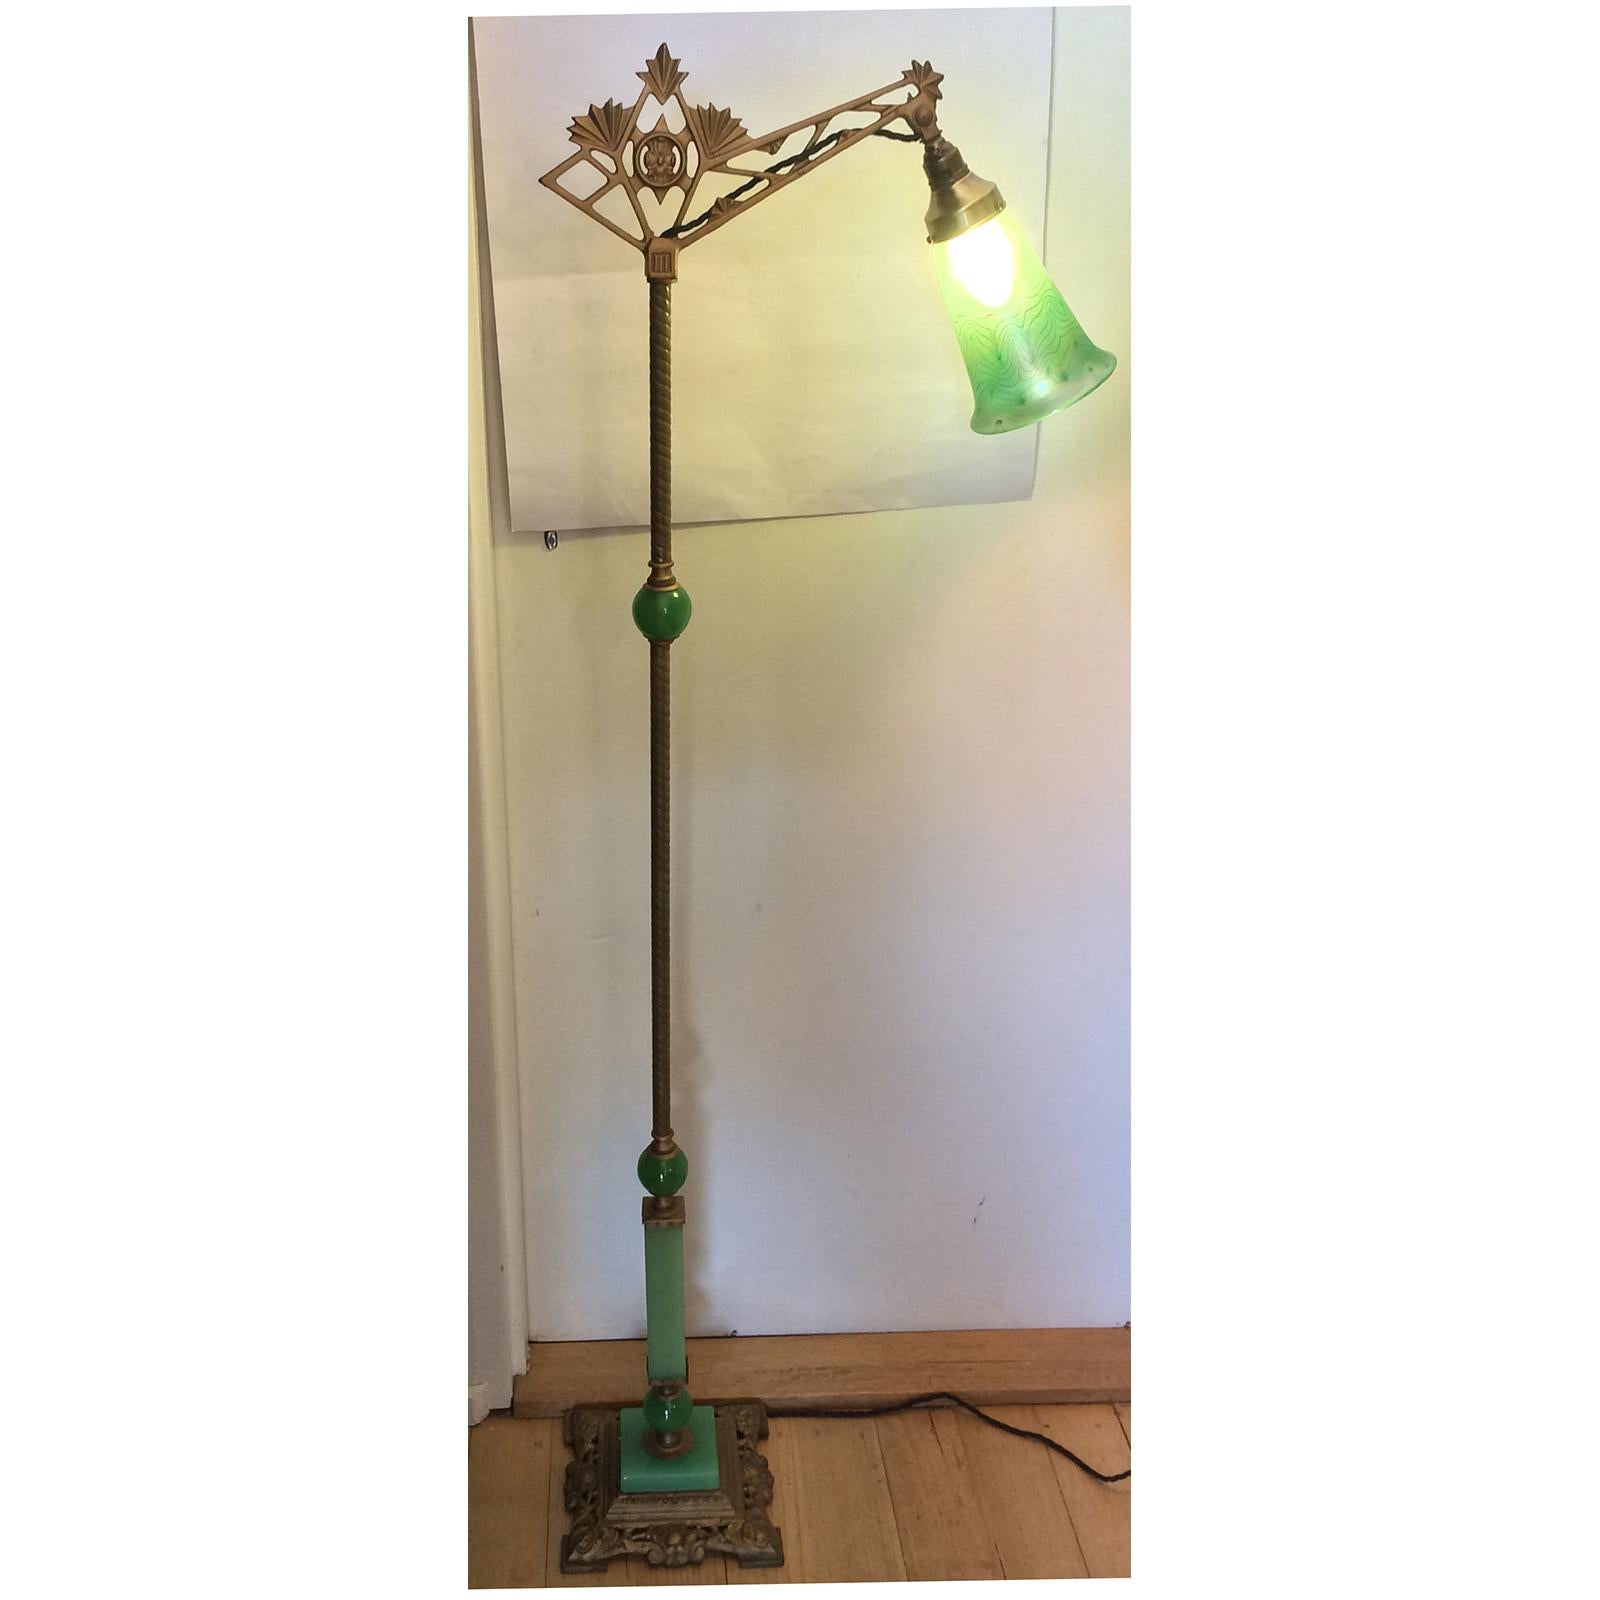 Early 20th Century Art Nouveau Jadeite Glass and Iridescent Pulled Feather Shade Bridge Floor Lamp